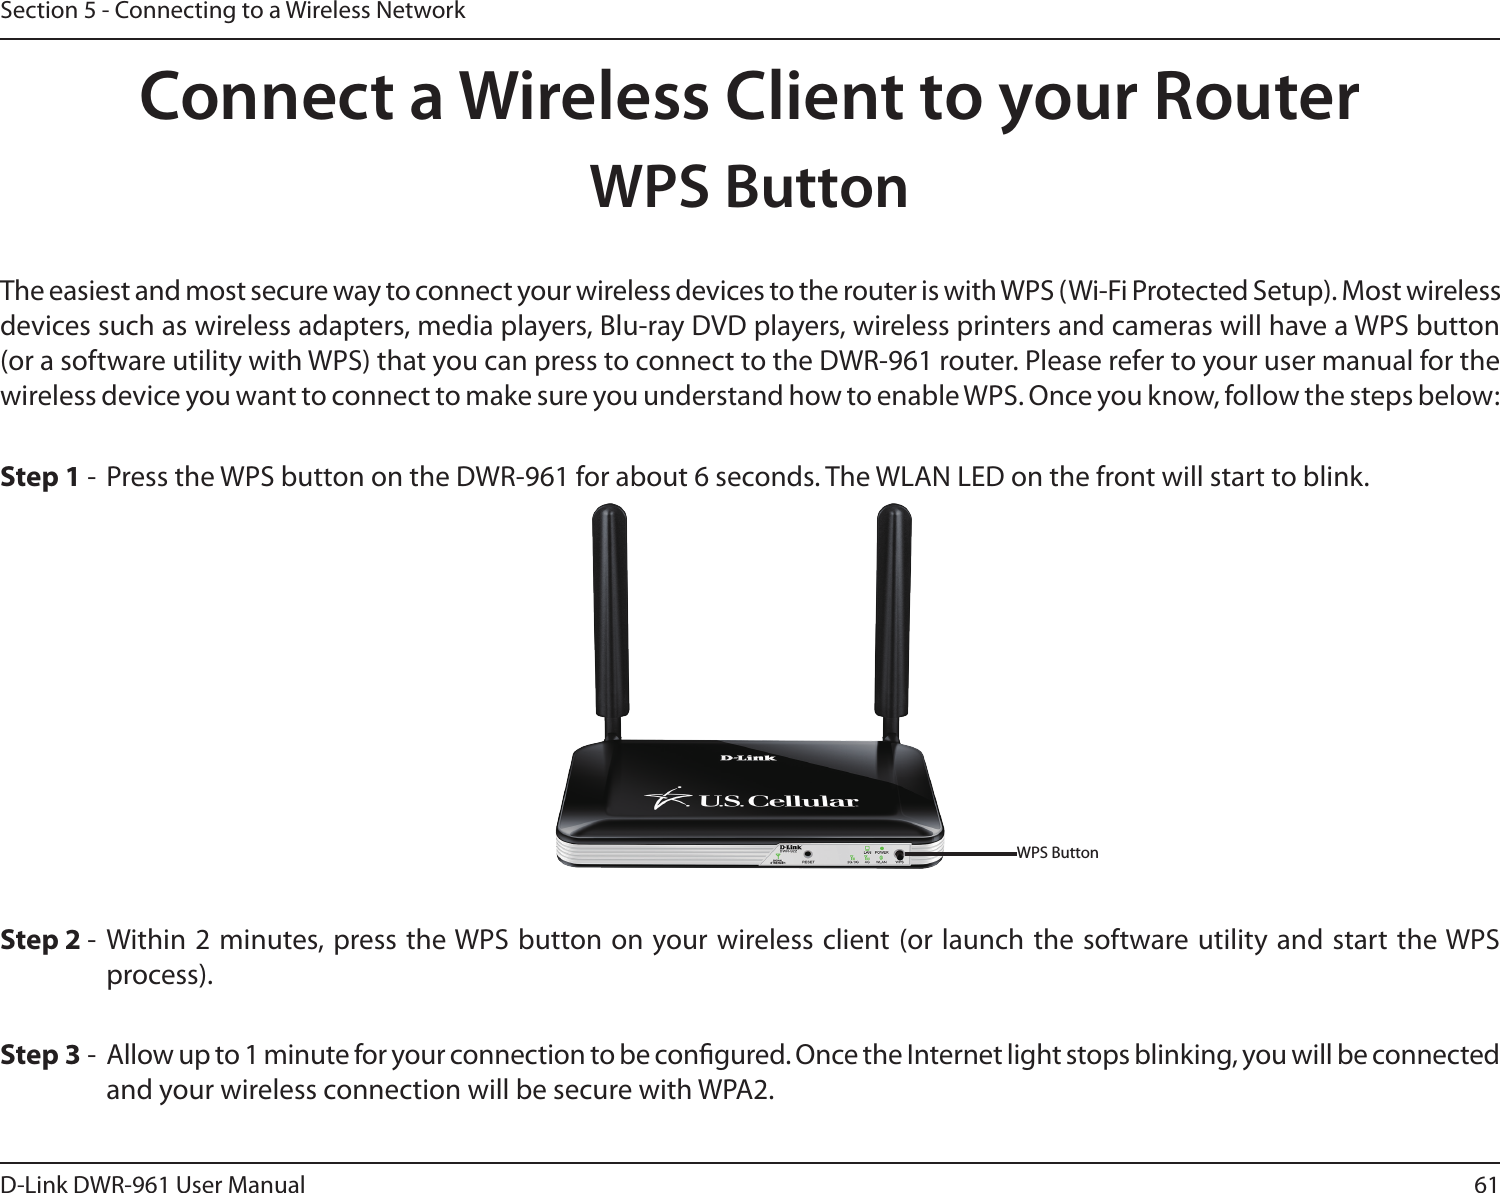 61D-Link DWR-961 User ManualSection 5 - Connecting to a Wireless NetworkConnect a Wireless Client to your RouterWPS ButtonStep 2 - Within 2 minutes, press the WPS button on your wireless client (or launch the software utility and start the WPS process).The easiest and most secure way to connect your wireless devices to the router is with WPS (Wi-Fi Protected Setup). Most wireless devices such as wireless adapters, media players, Blu-ray DVD players, wireless printers and cameras will have a WPS button (or a software utility with WPS) that you can press to connect to the DWR-961 router. Please refer to your user manual for the wireless device you want to connect to make sure you understand how to enable WPS. Once you know, follow the steps below:Step 1 -  Press the WPS button on the DWR-961 for about 6 seconds. The WLAN LED on the front will start to blink.Step 3 -  Allow up to 1 minute for your connection to be congured. Once the Internet light stops blinking, you will be connected and your wireless connection will be secure with WPA2.WPS Button